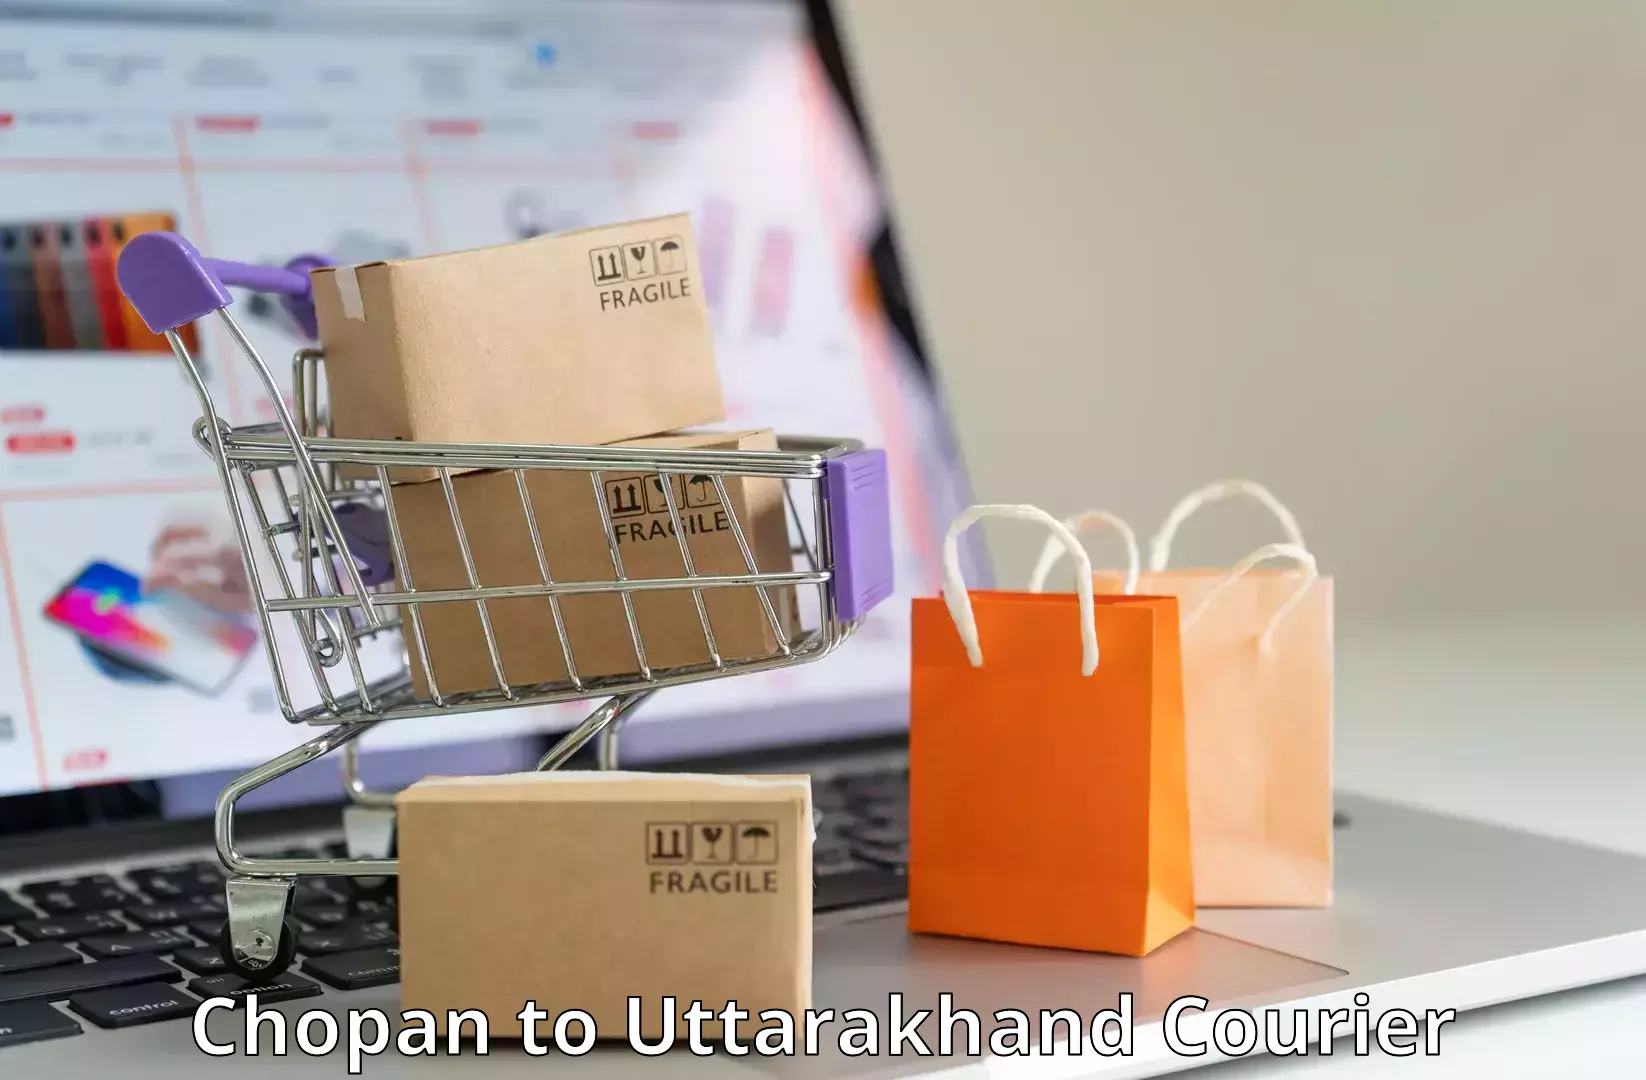 Reliable freight solutions Chopan to Uttarakhand